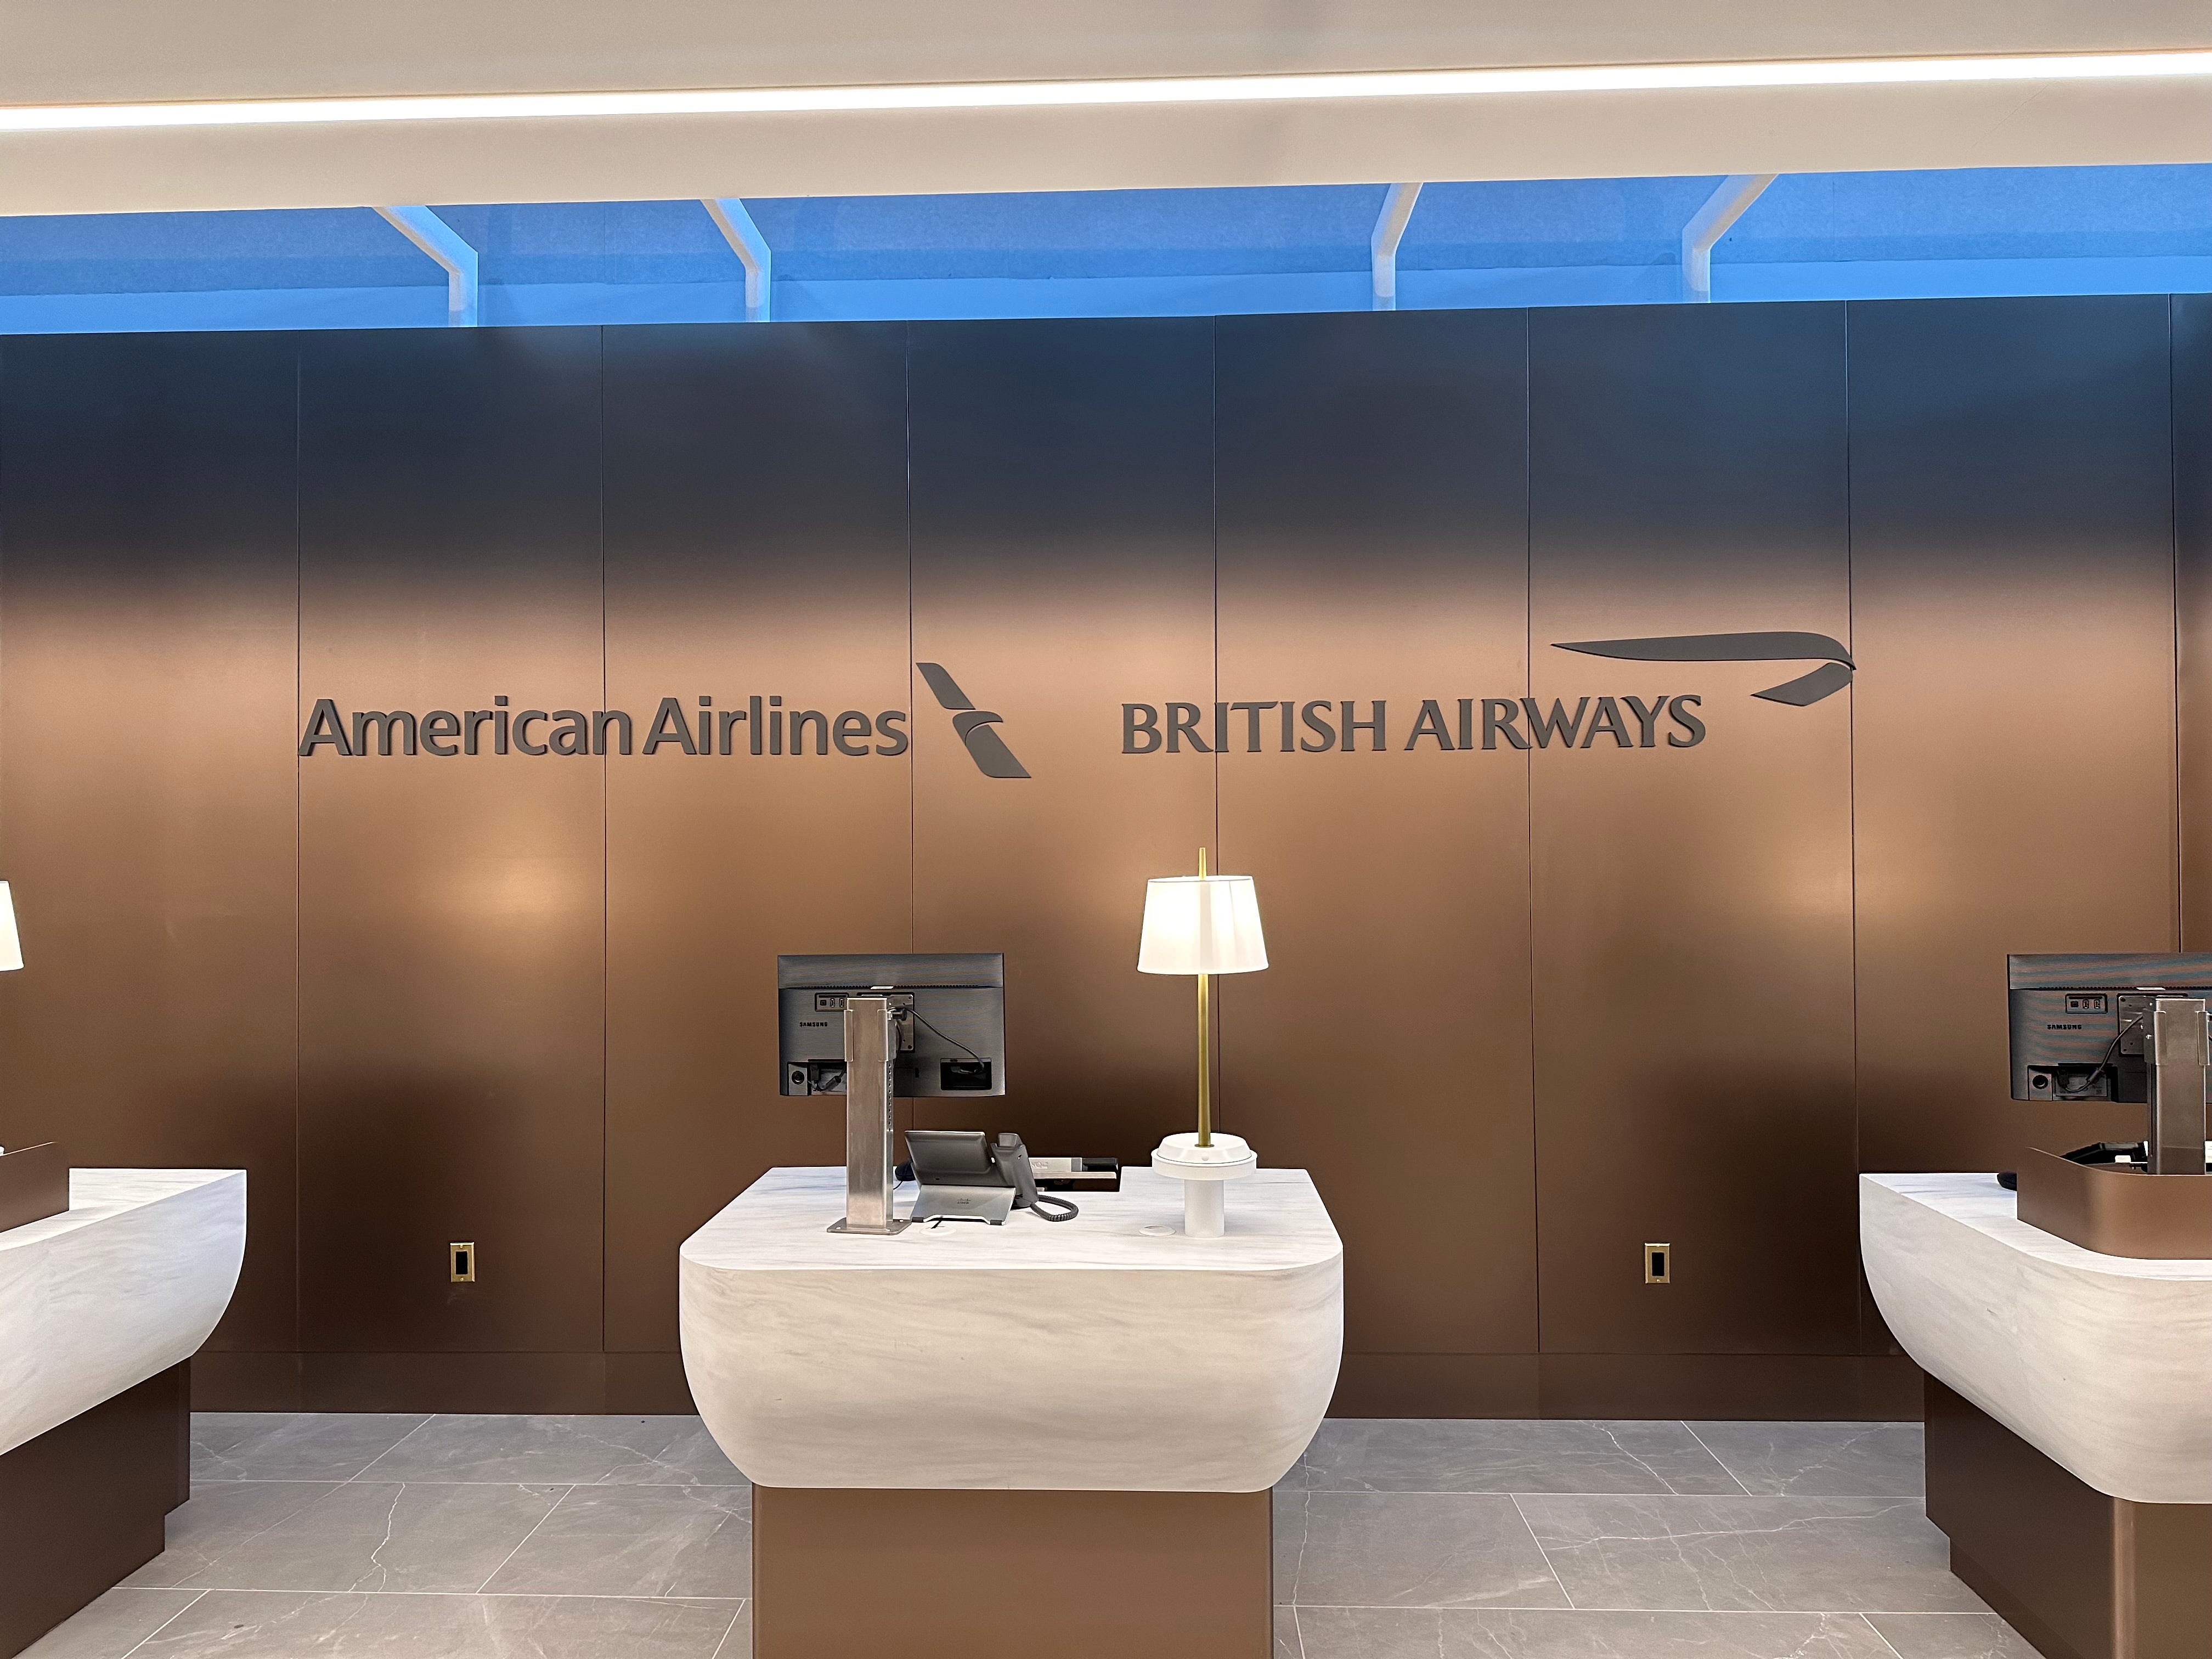 It’s the first time BA and American have built shared lounges